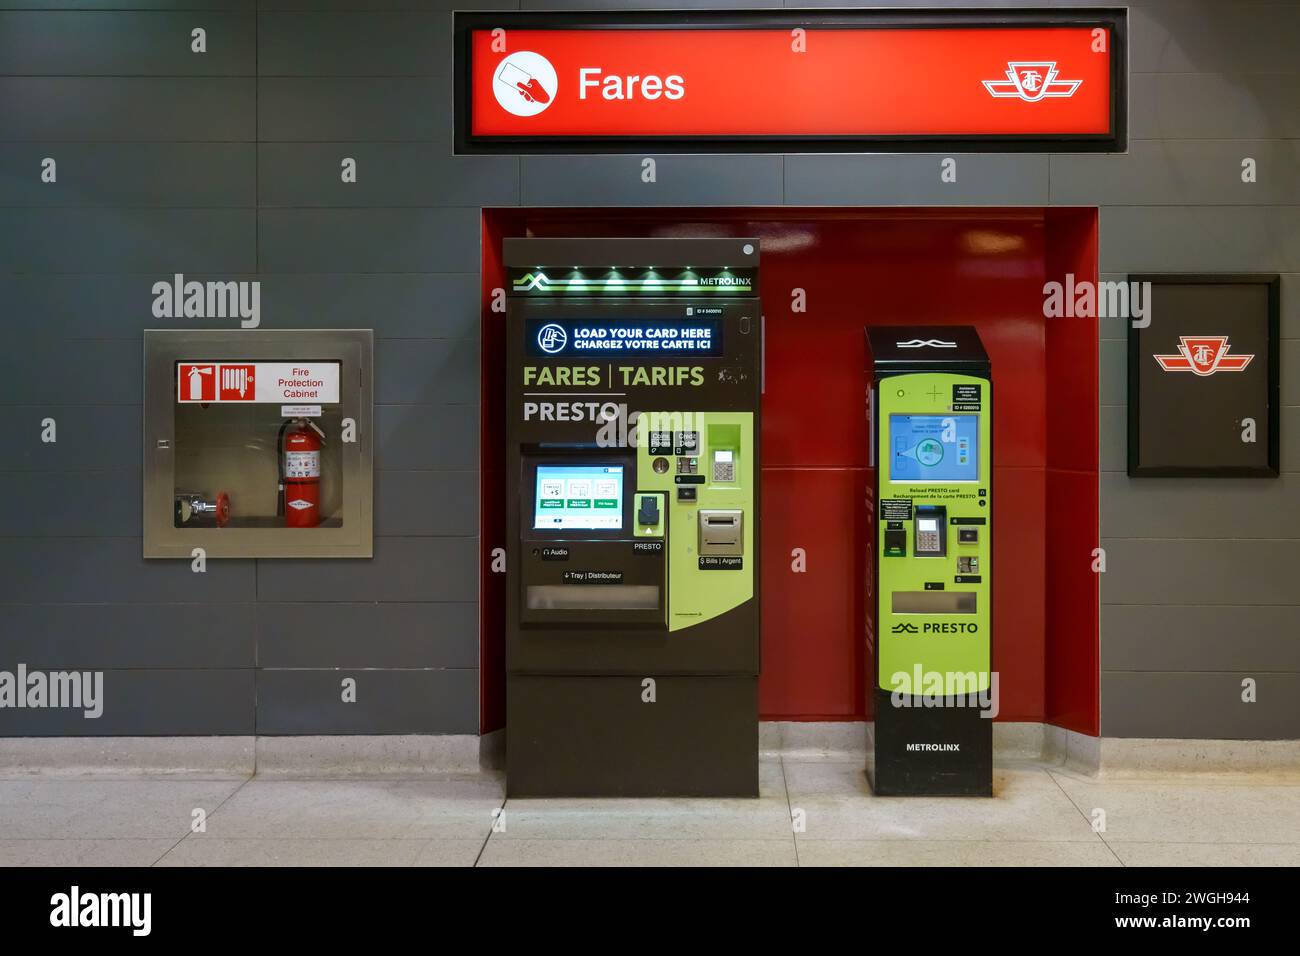 Presto fare loading machines in Vaughan Metropolitan Centre. The building is a TTC subway station. Stock Photo